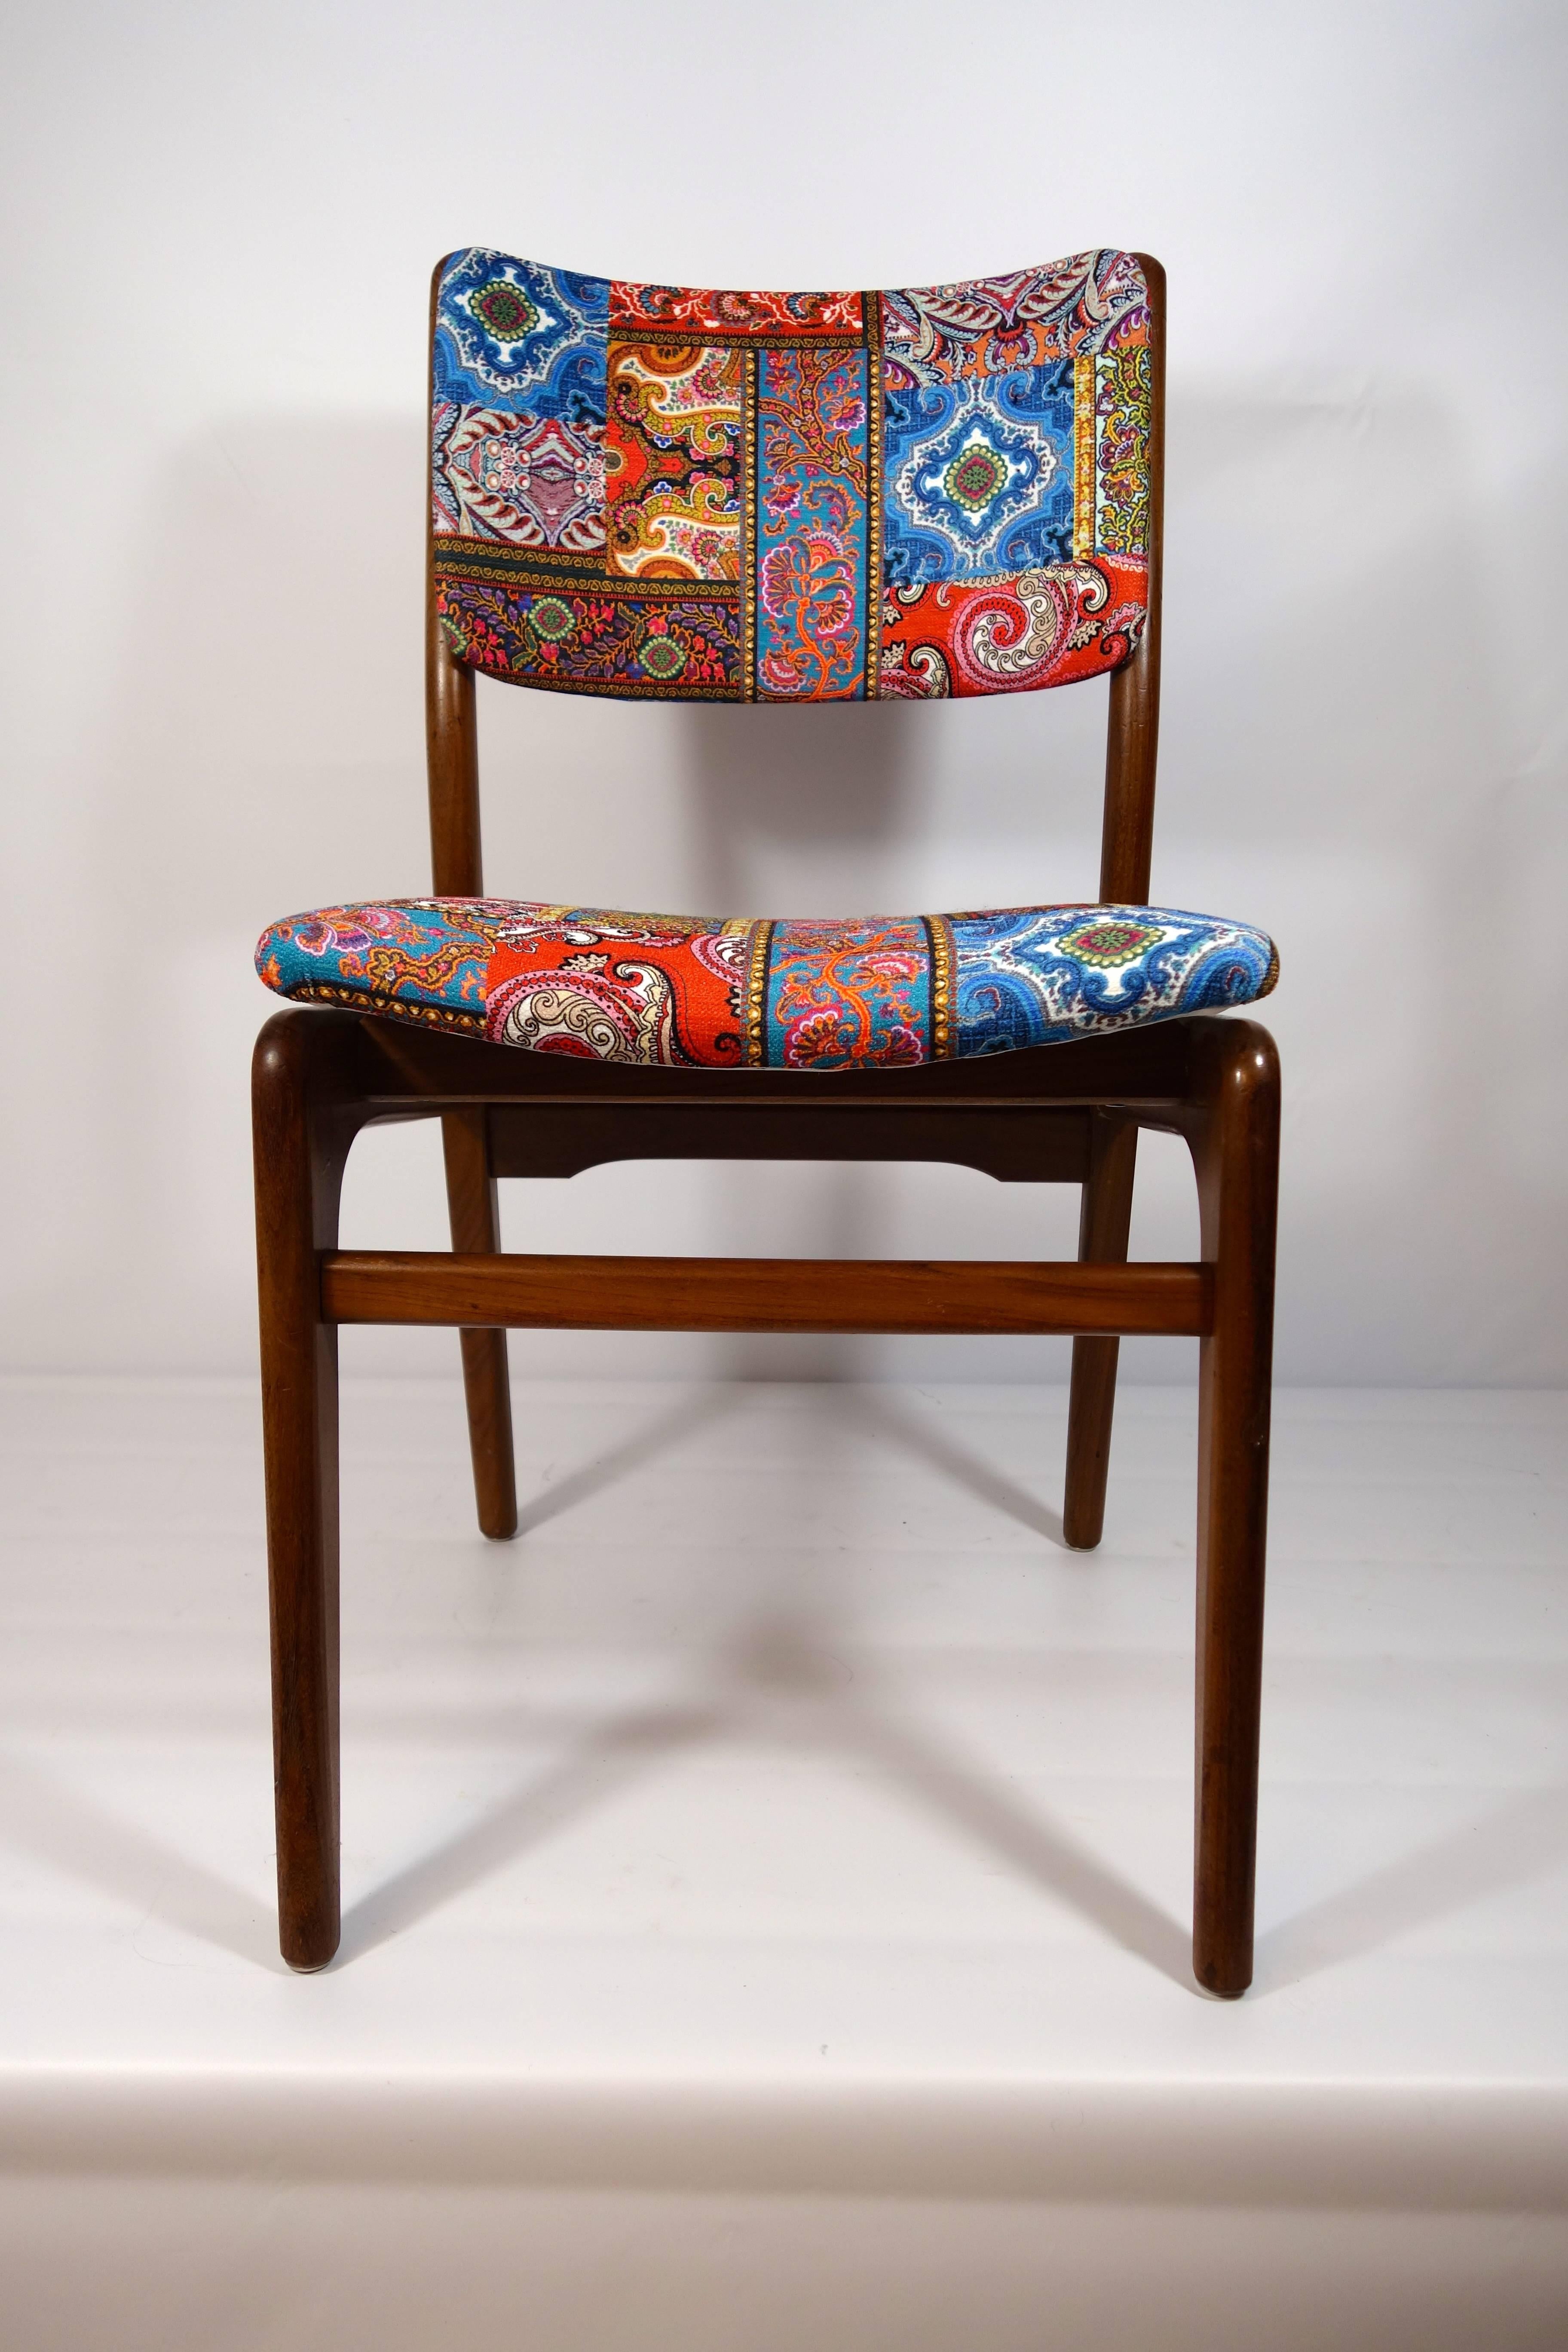 Fabric Set of 6 Midcentury Dining Chairs created by Louis Van Teeffelen for Wébé